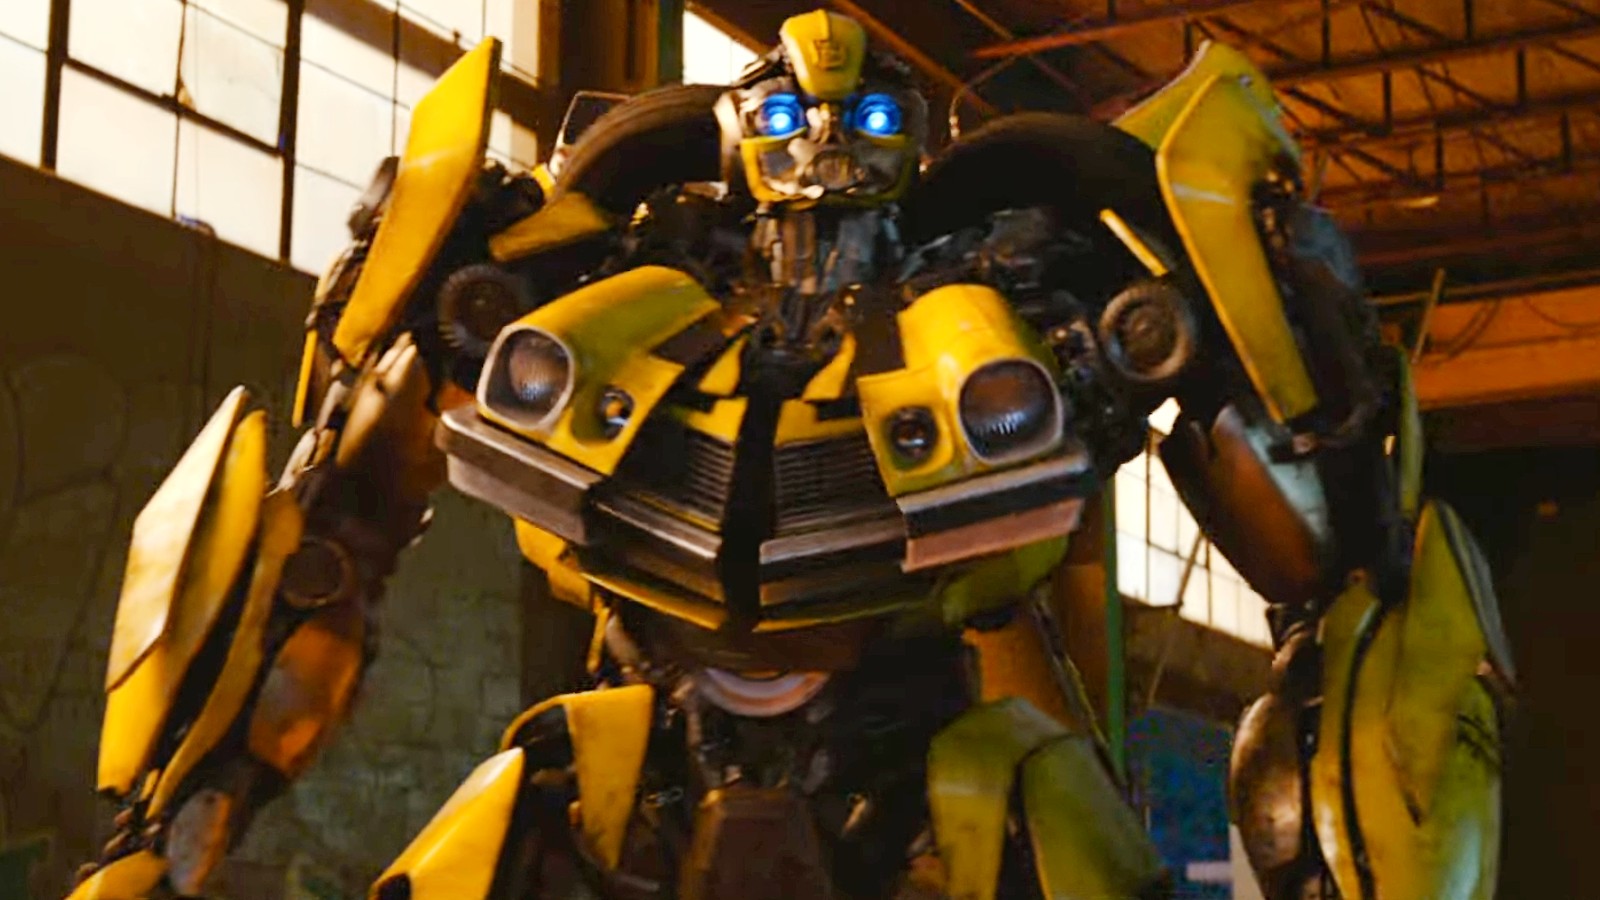 Transformers' Fans Hope 'Rise of the Beasts' Continues the Magic of ' Bumblebee'